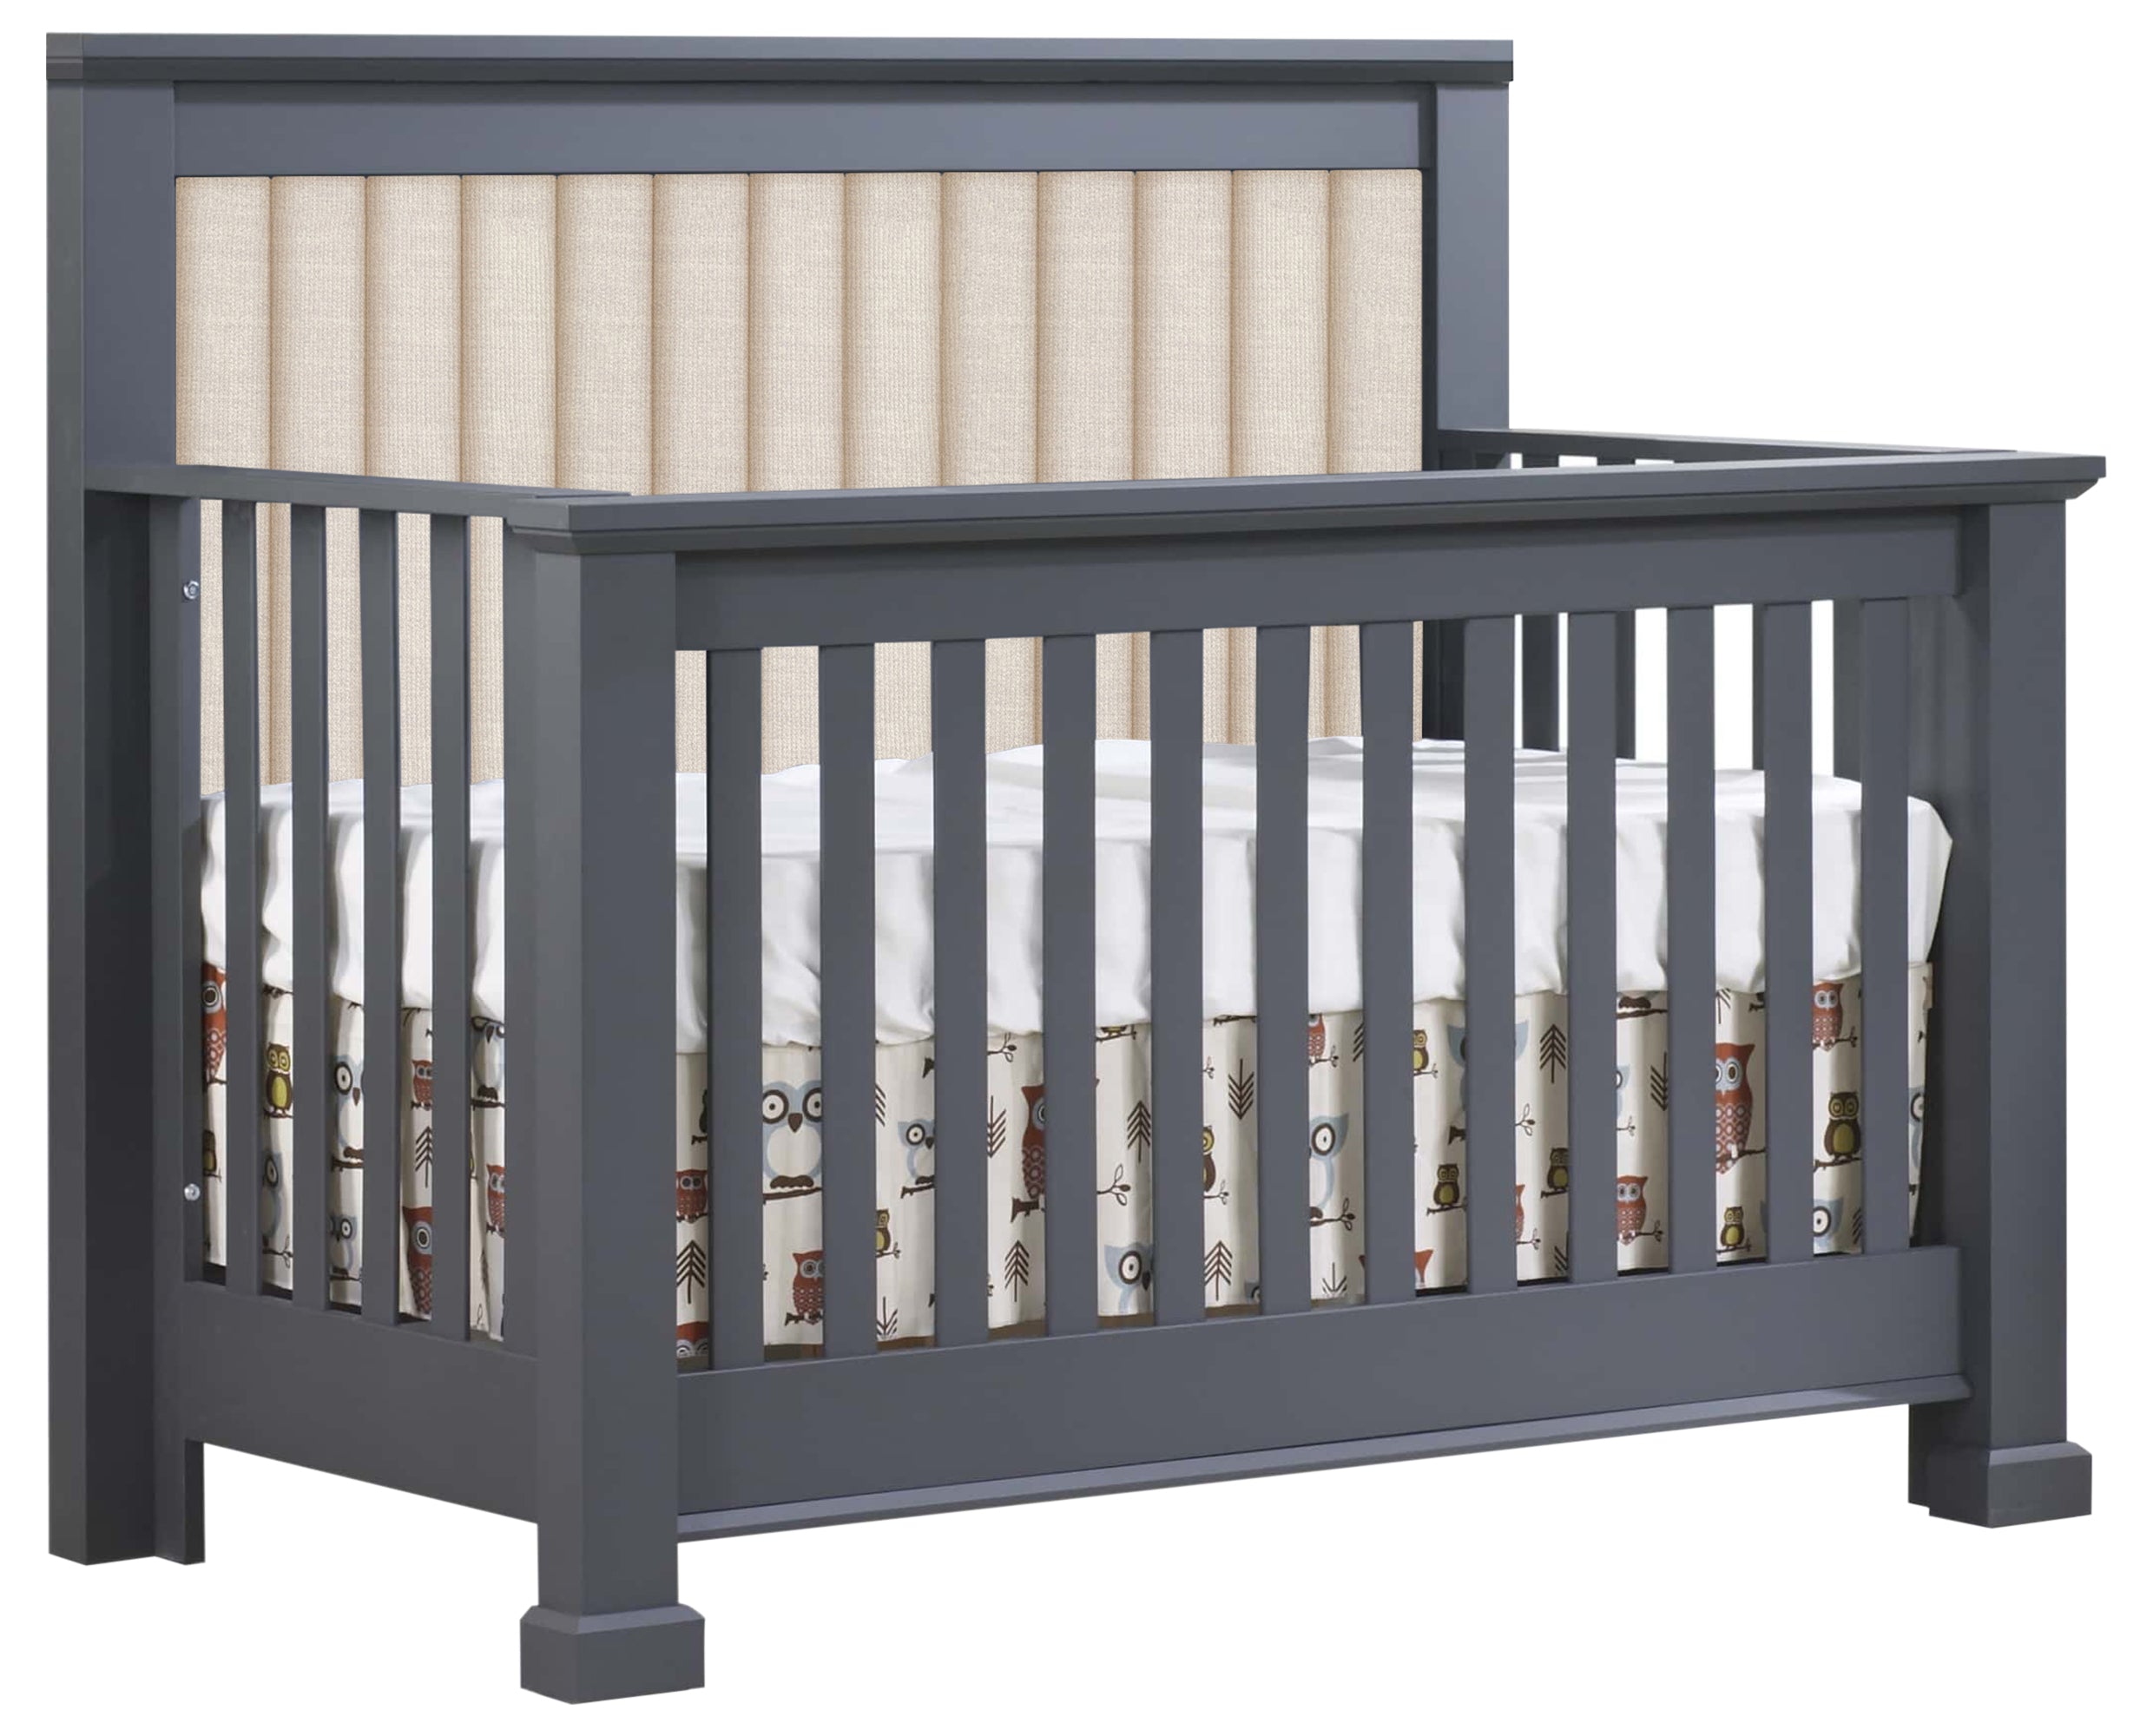 Graphite Birch with Talc Fabric | Taylor 5-in-1 Convertible Crib w/Upholstered Headboard Panel | Valley Ridge Furniture